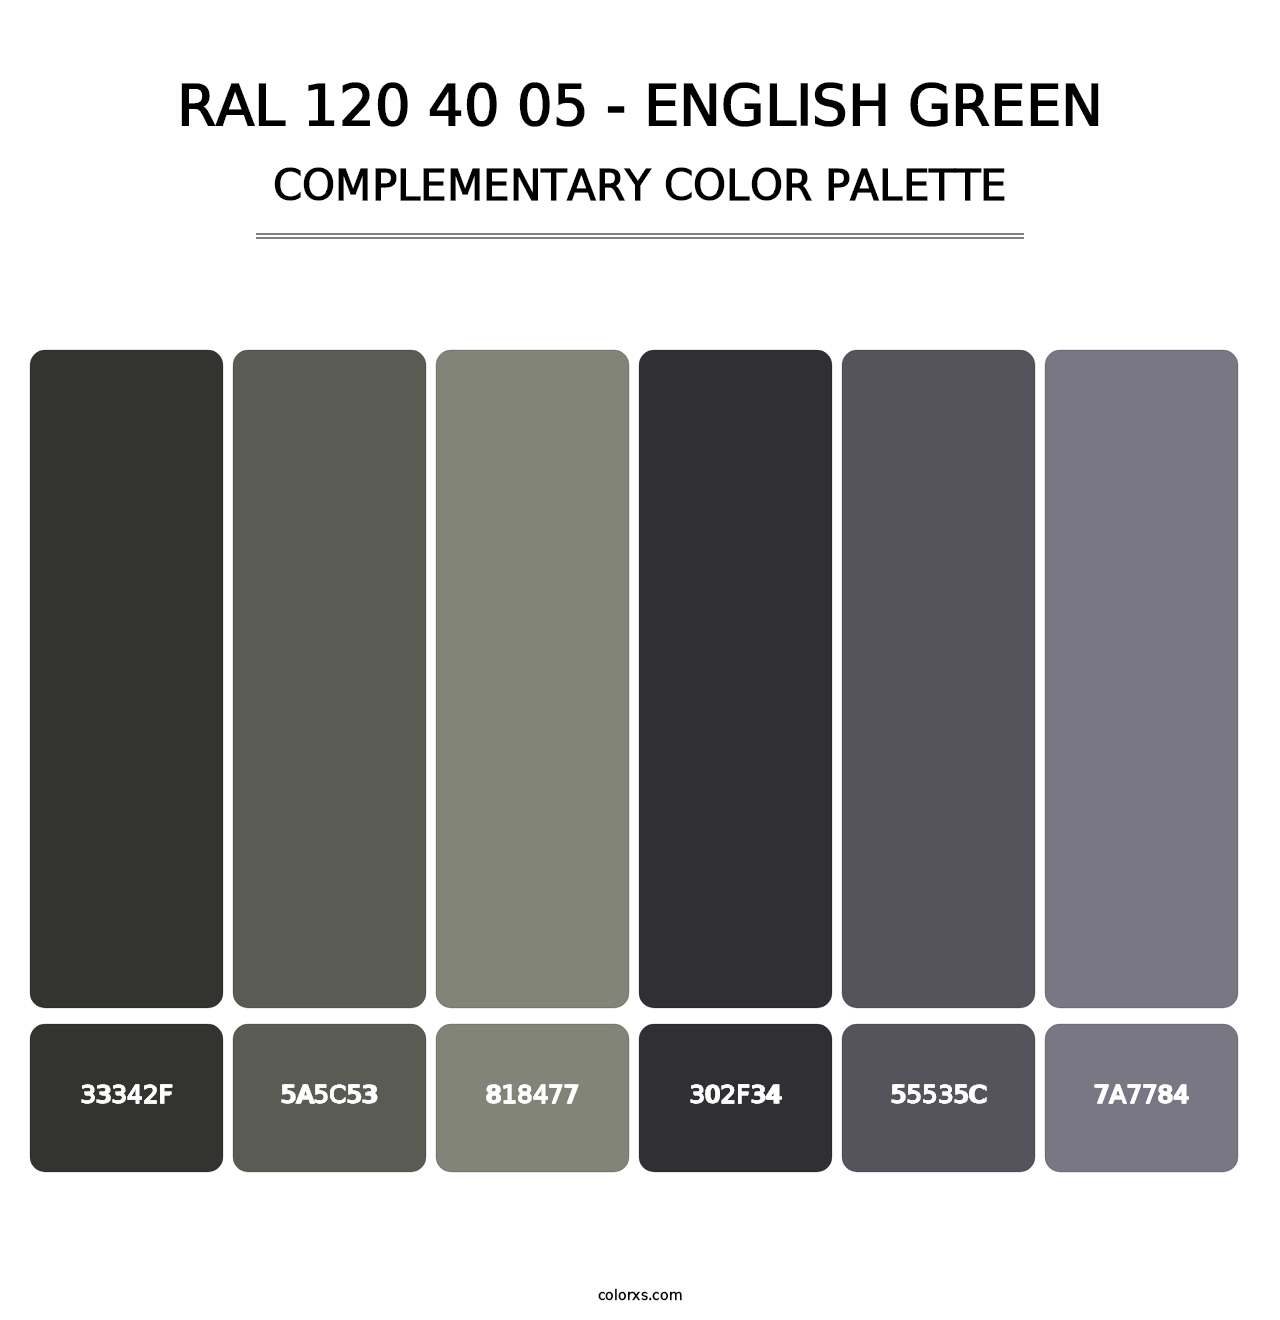 RAL 120 40 05 - English Green - Complementary Color Palette